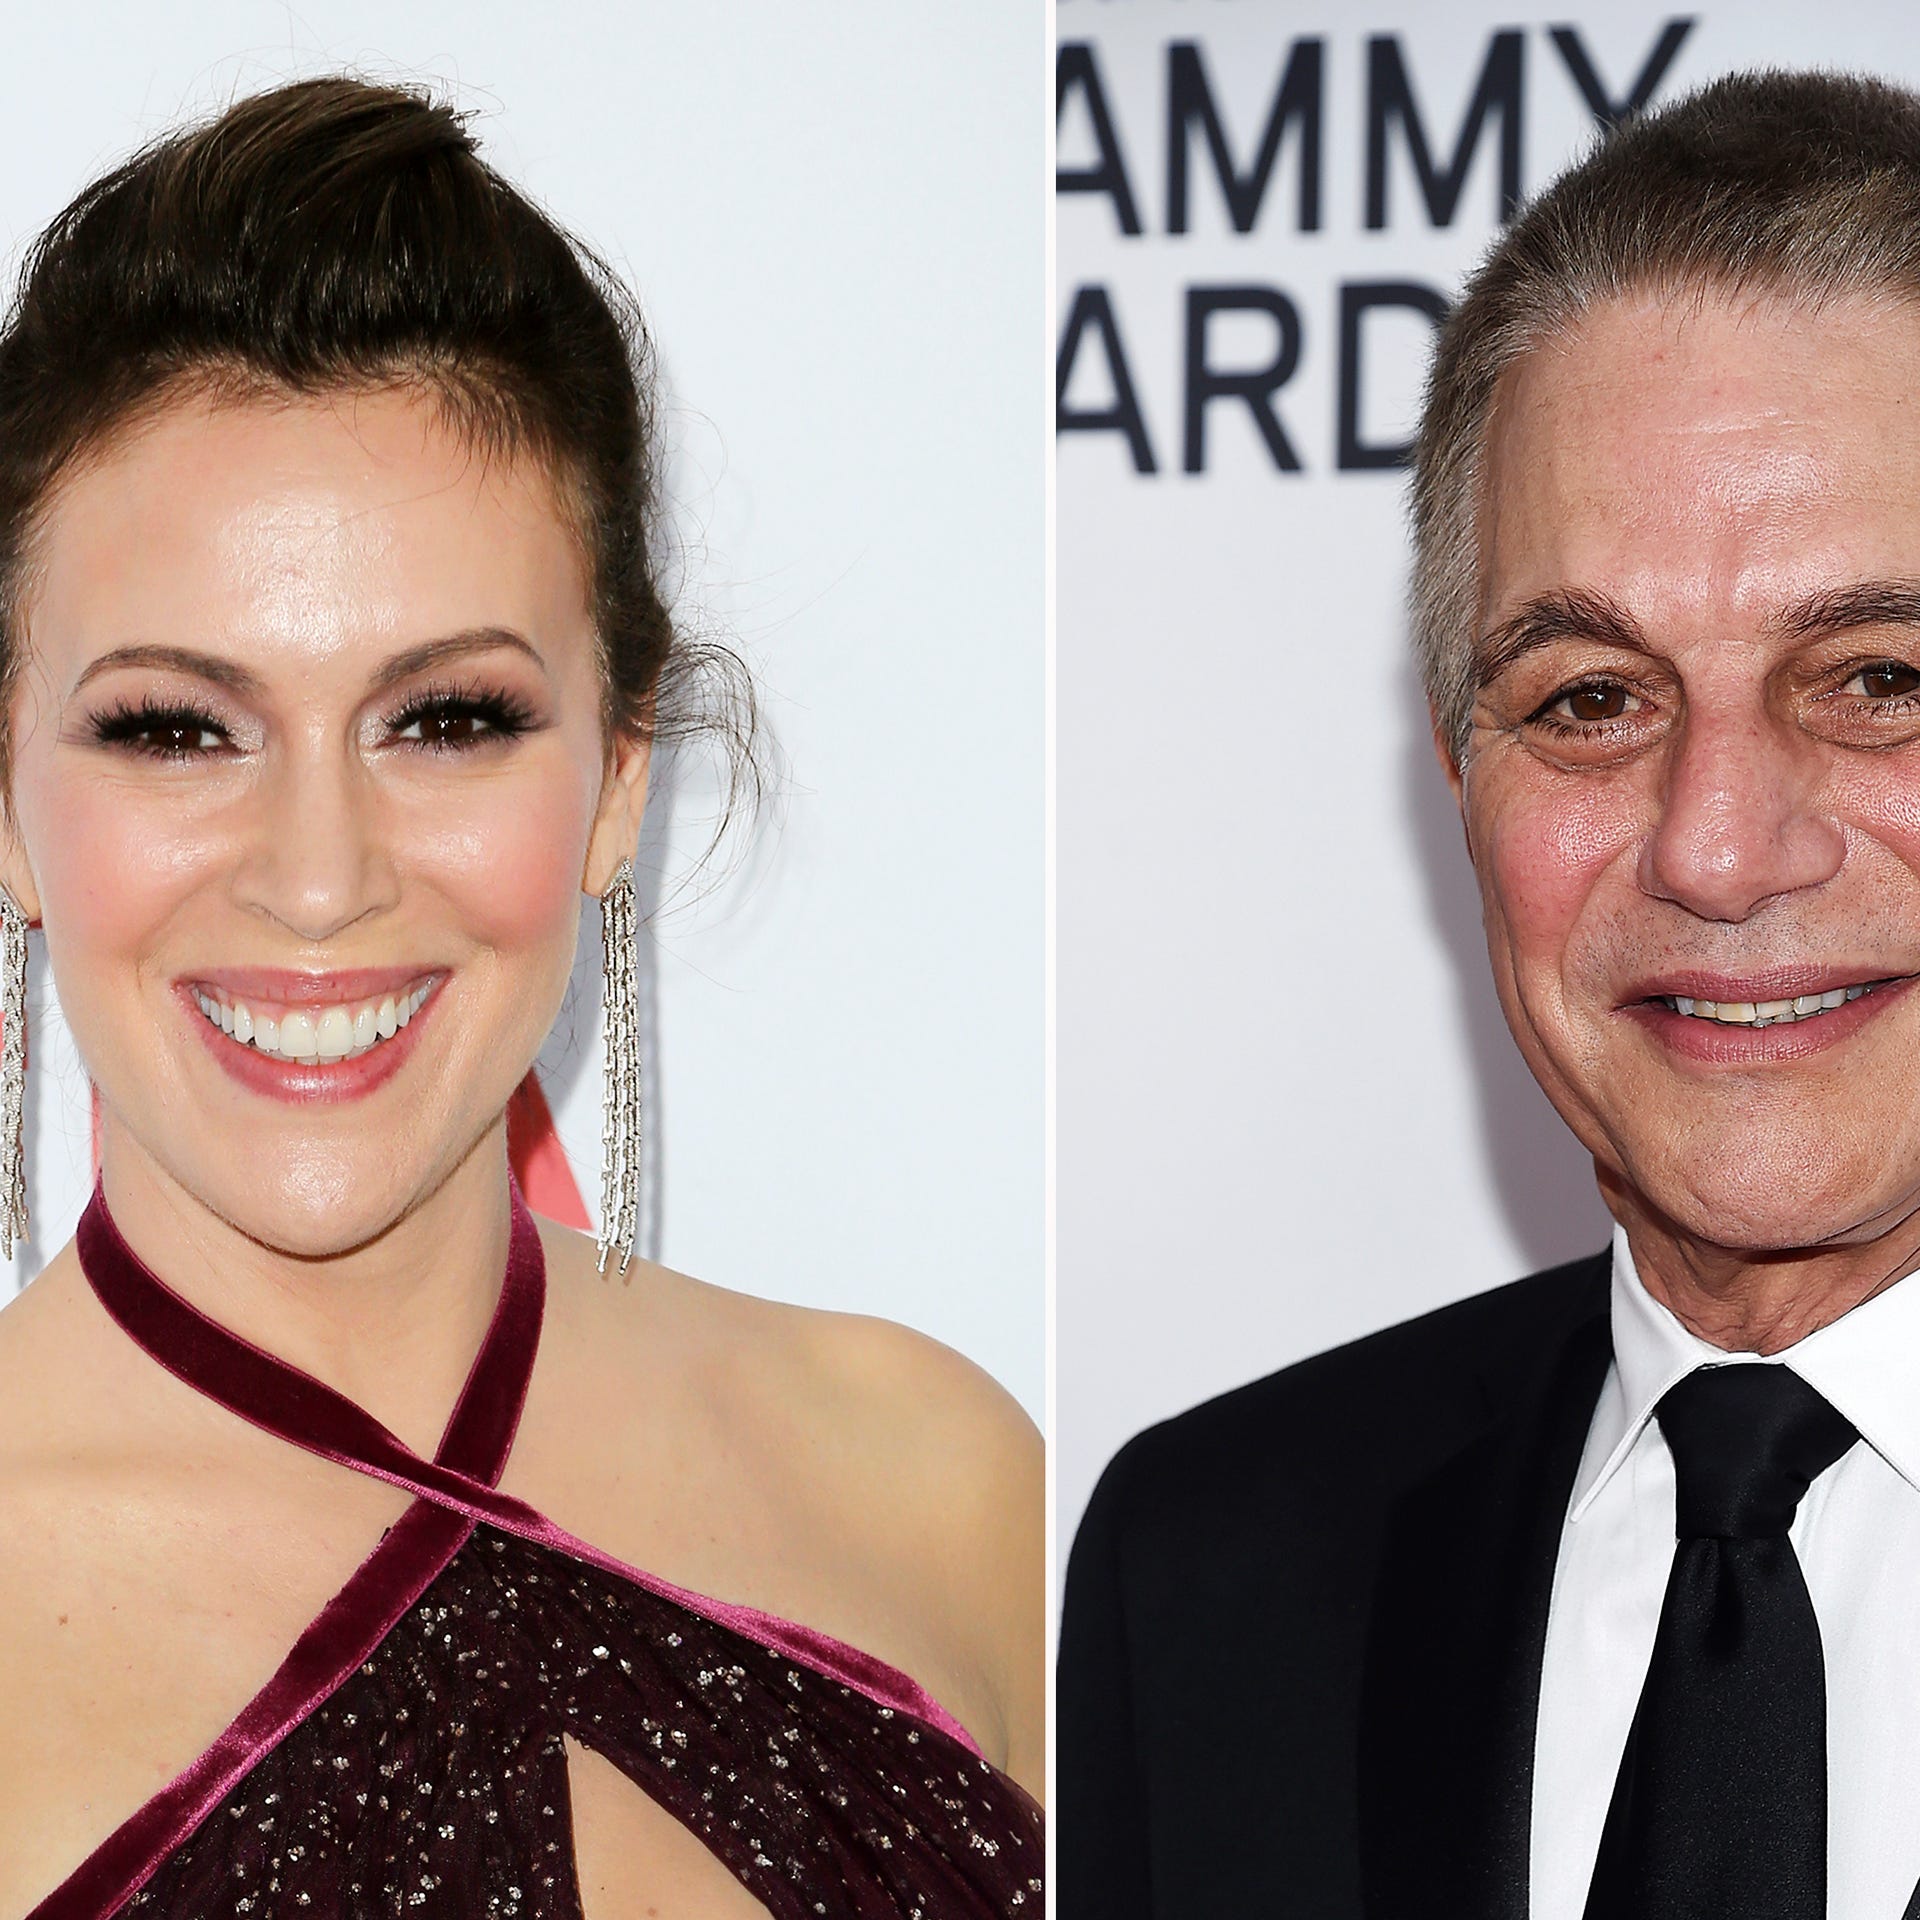 A sequel to "Who's the Boss?" is in the works at Sony Pictures Television, with Tony Danza and Alyssa Milano set to reprise their father-daughter roles from the 1980s-'90s sitcom.